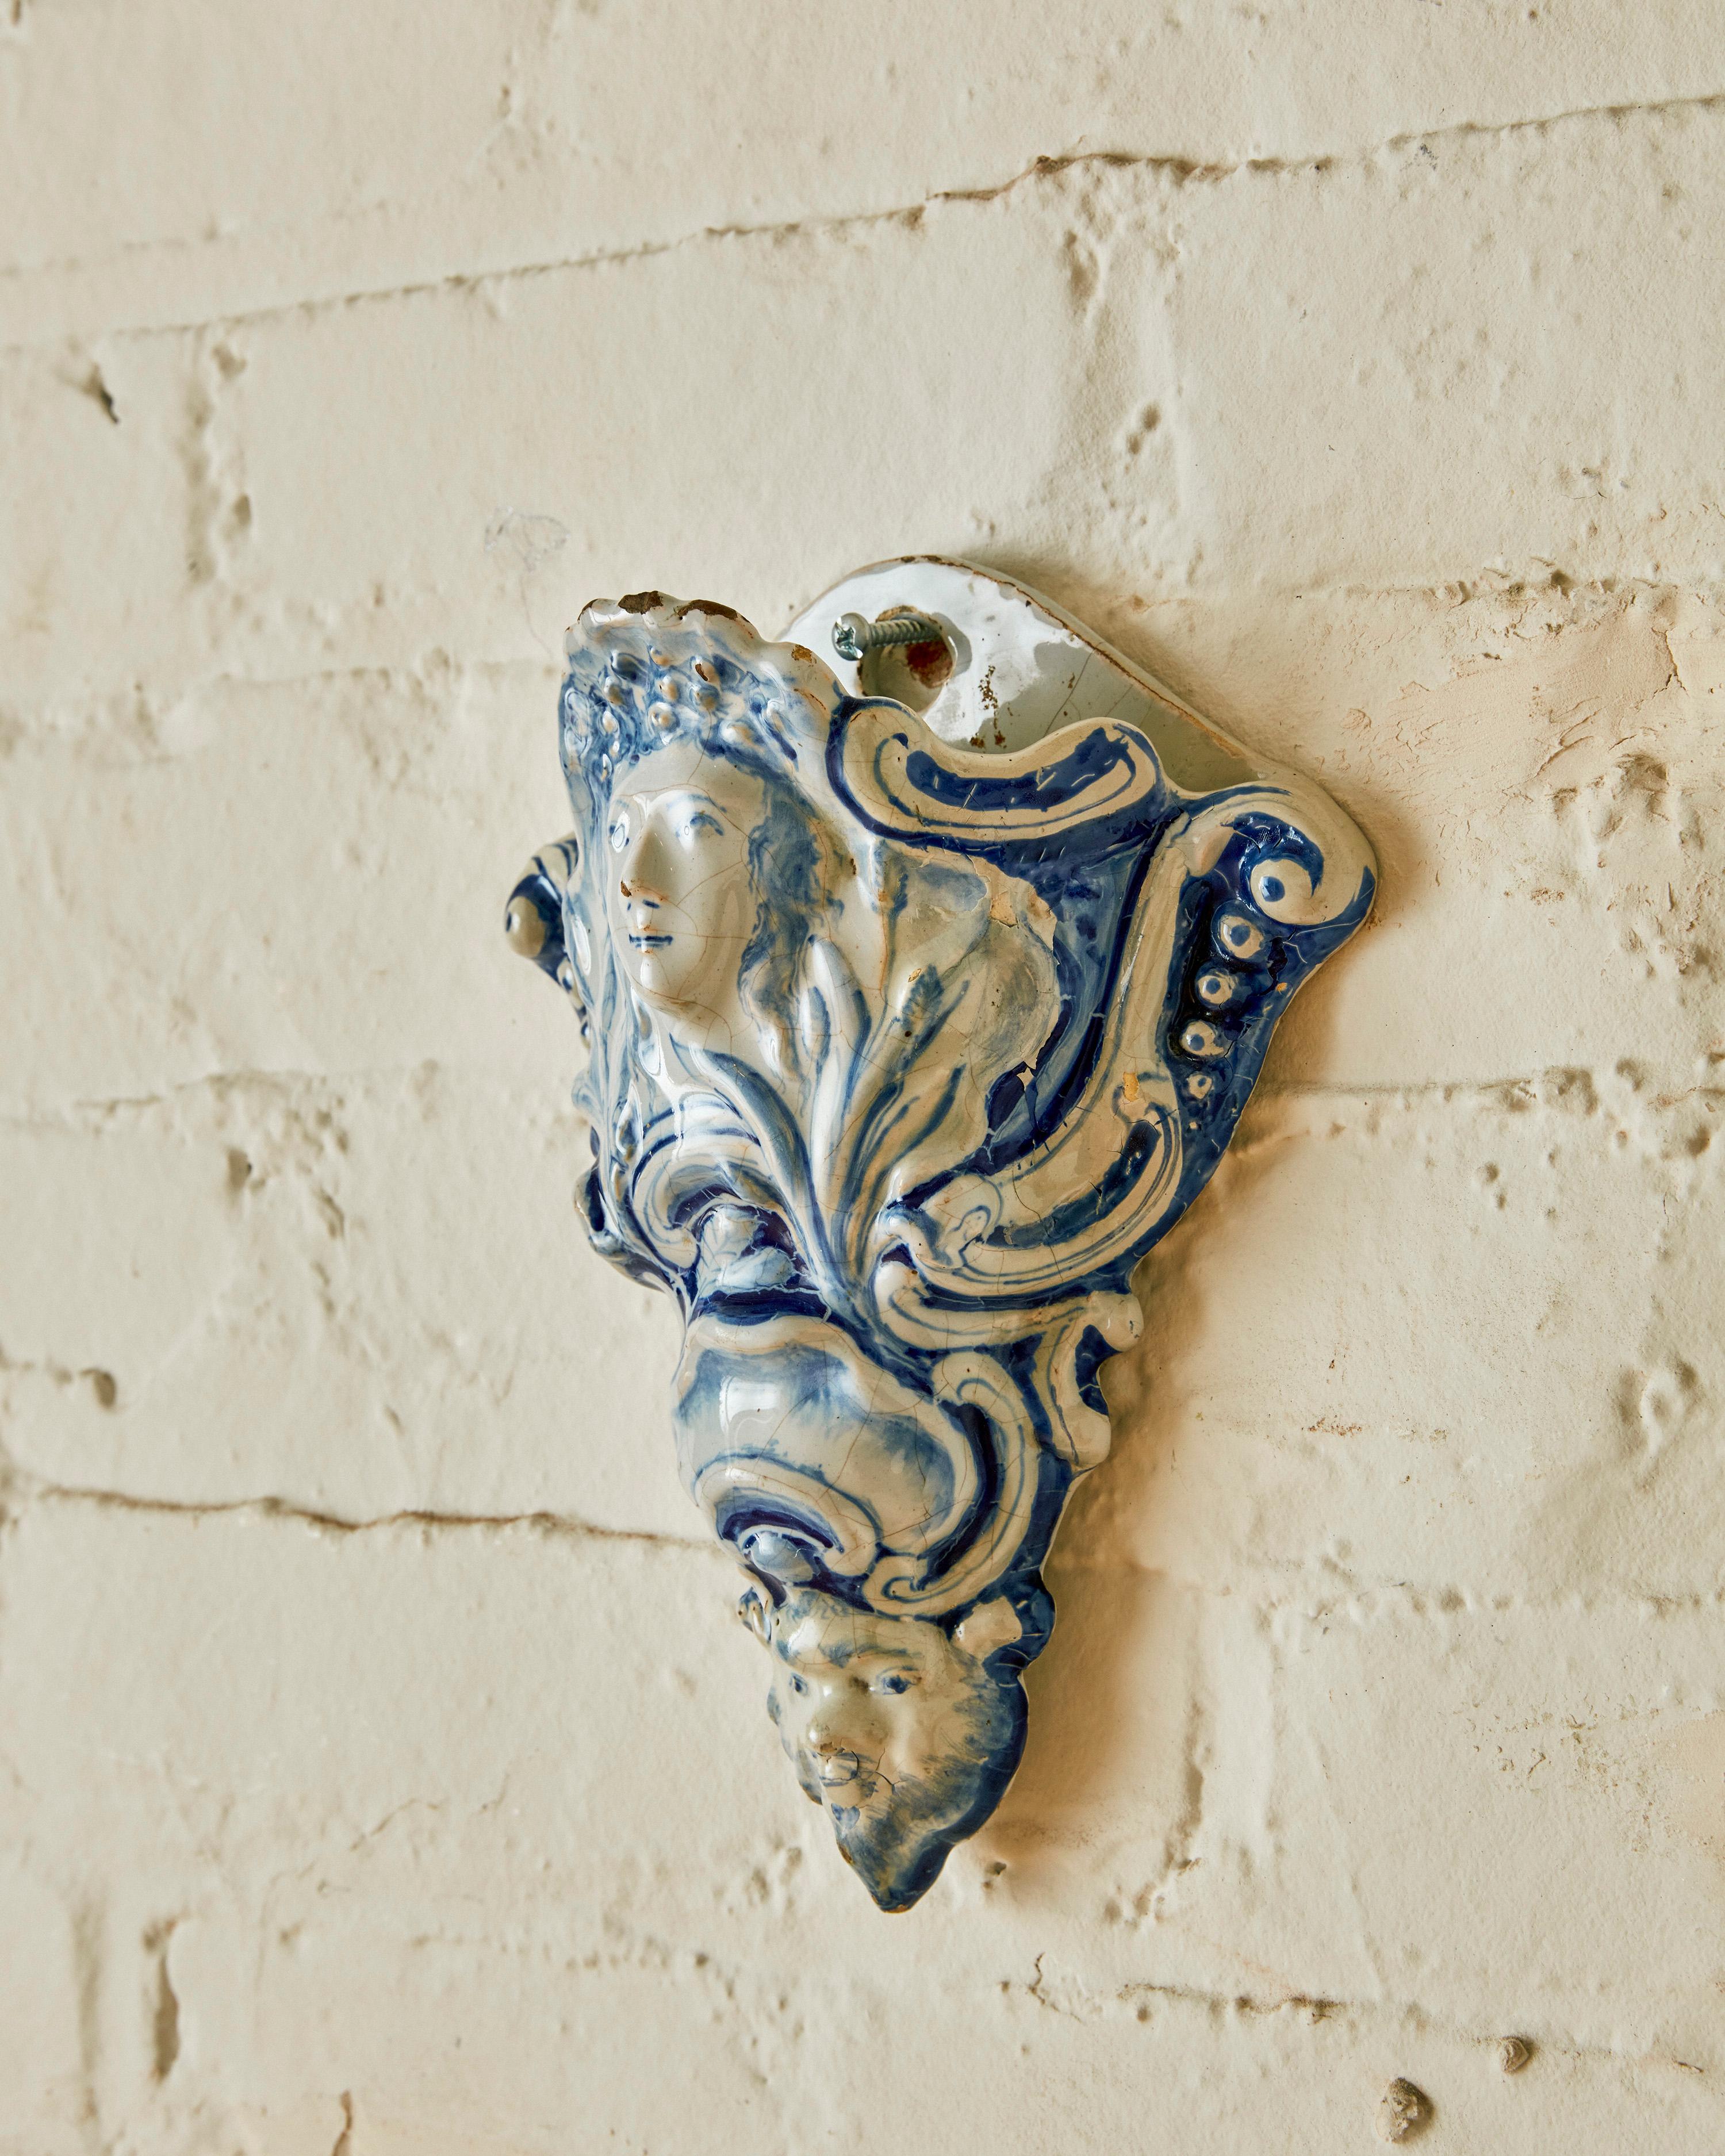 Glazed Ceramic Delft Wall Pocket  In Good Condition For Sale In Long Island City, NY